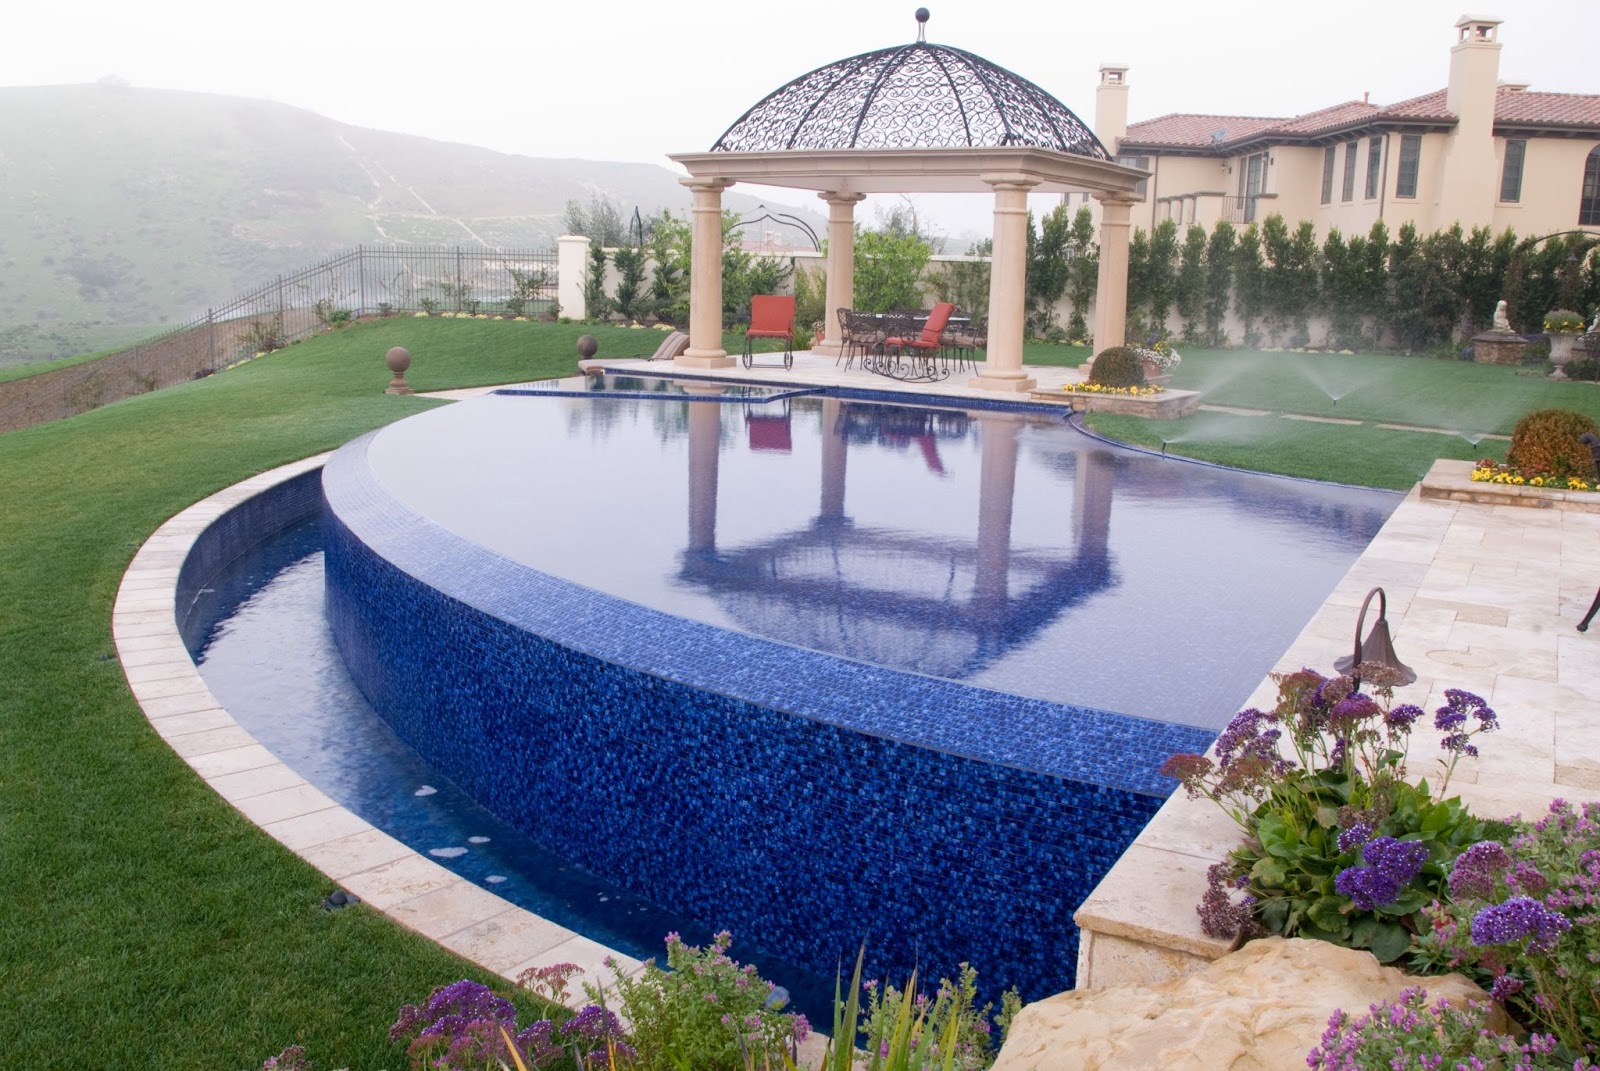 A swimming pool and a lawn uses more water